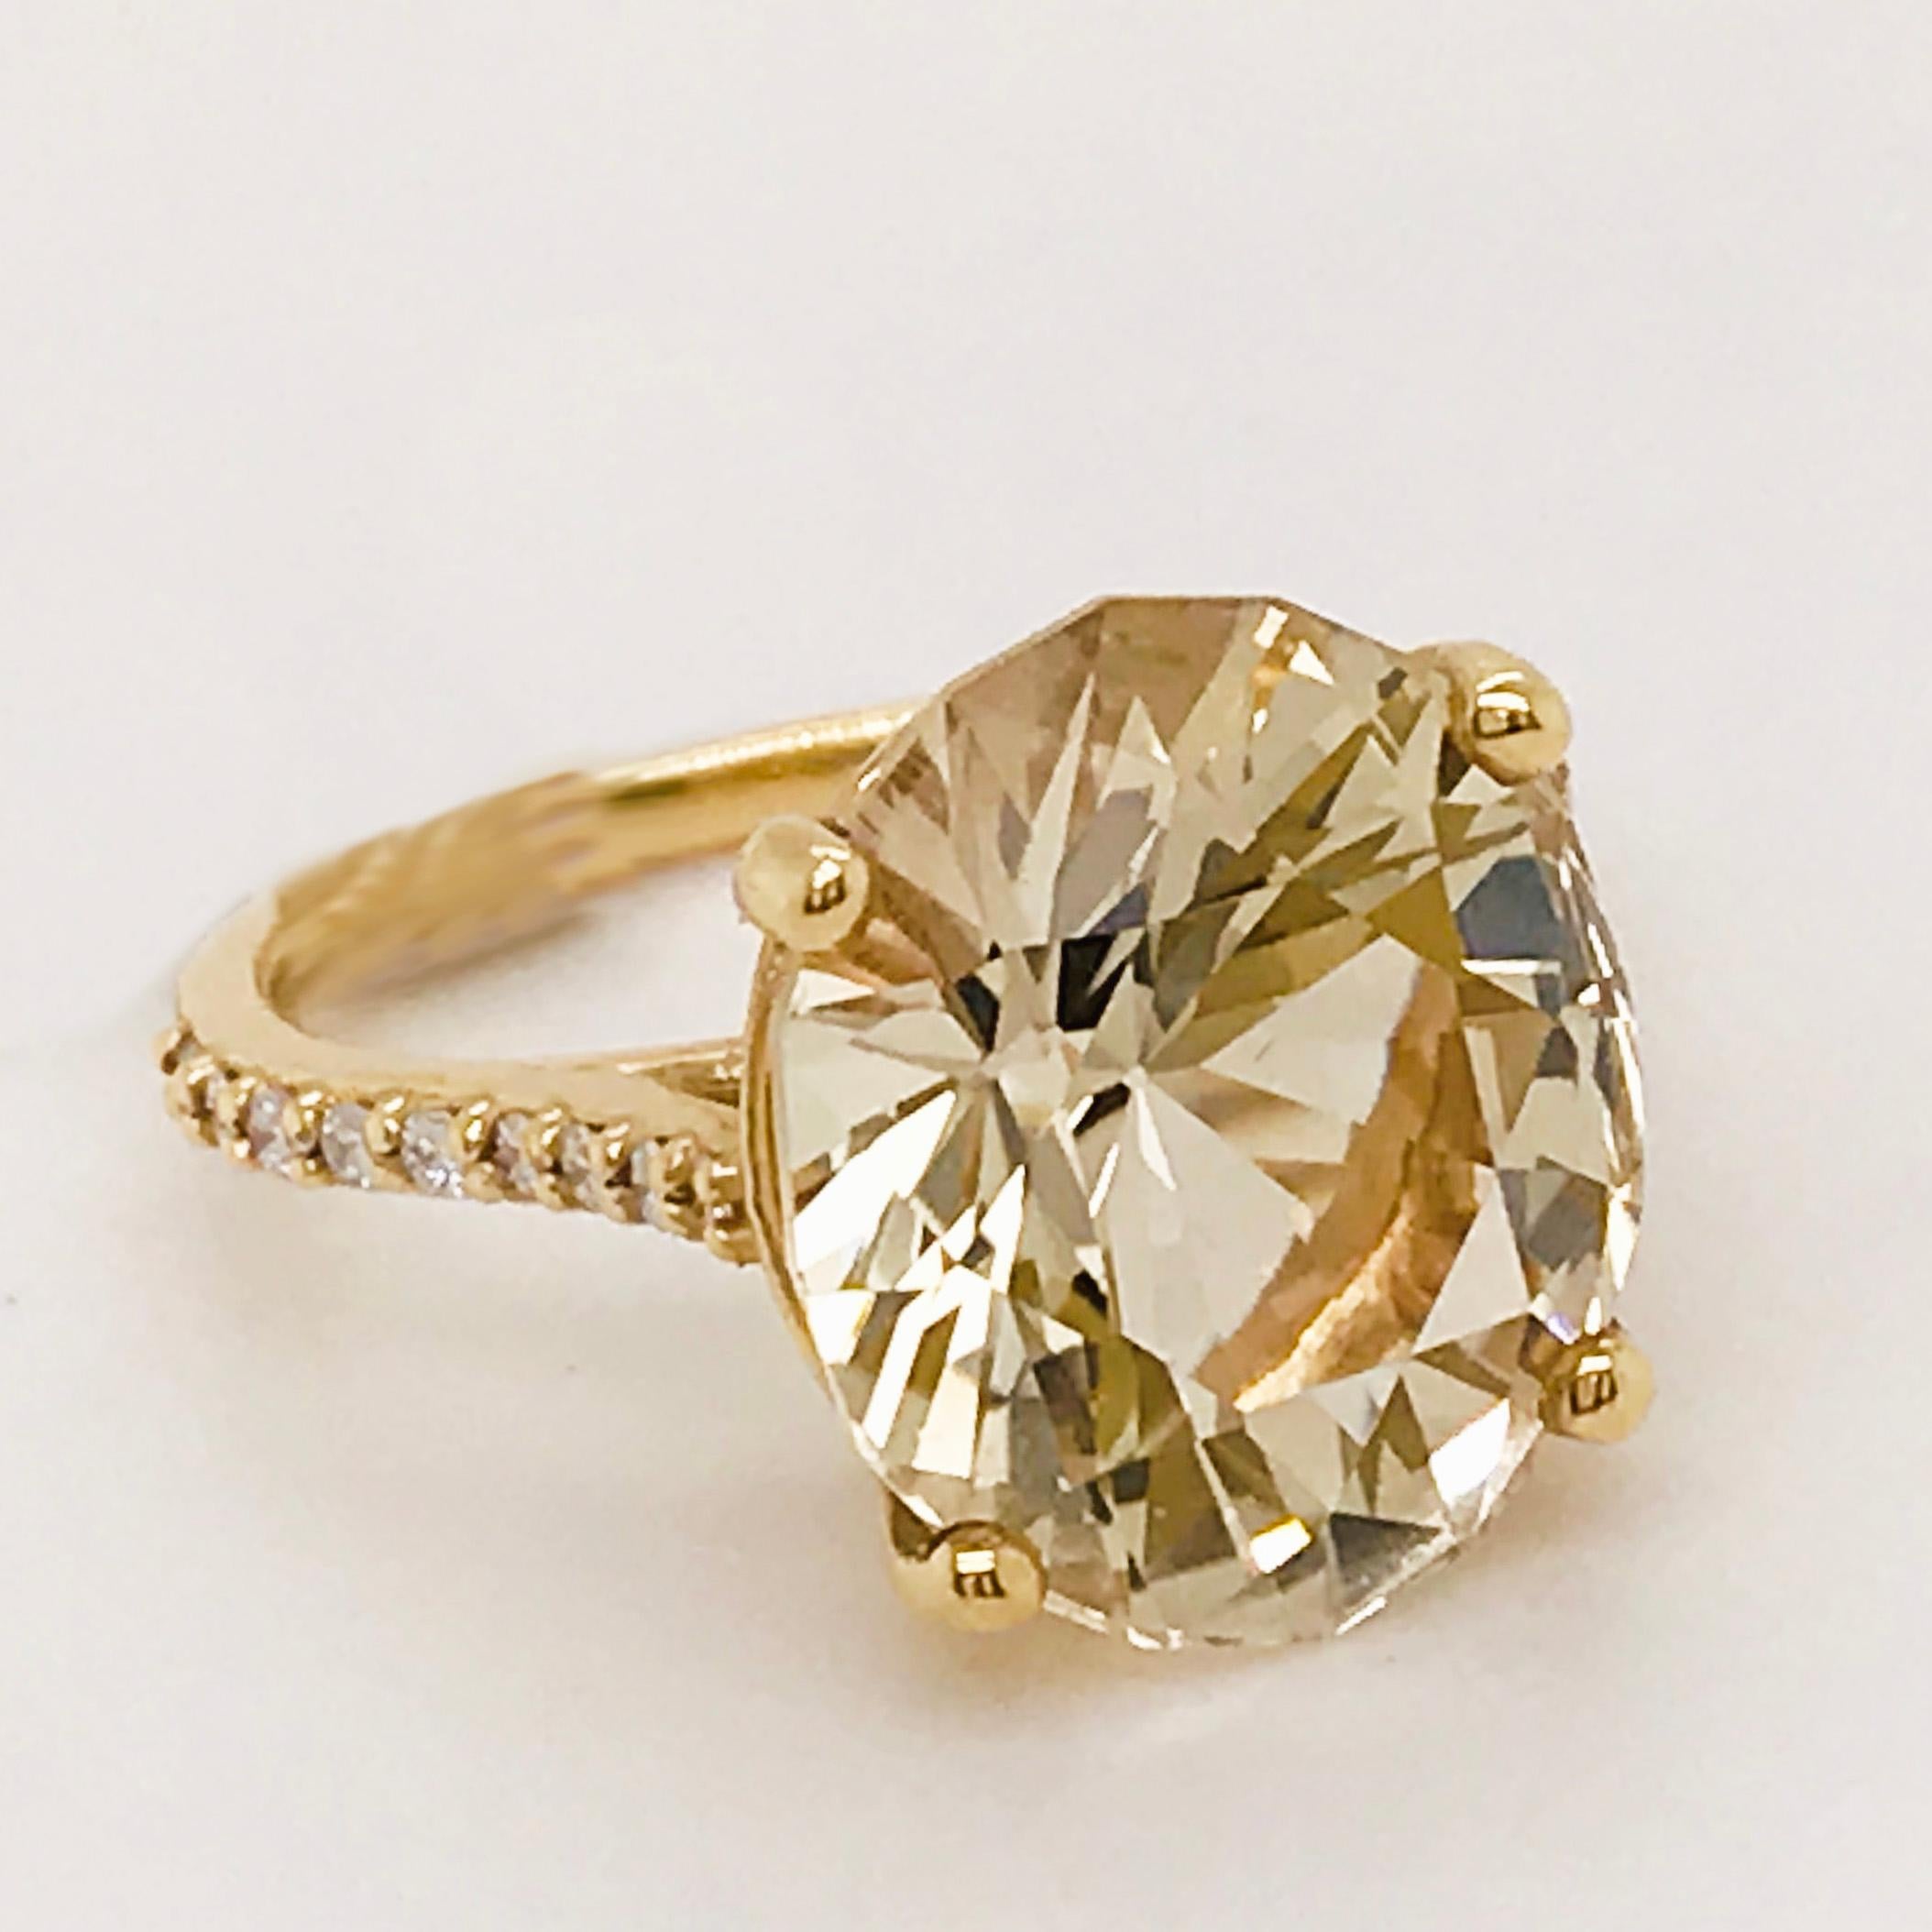 This gorgeous piece is a statement! With genuine yellow beryl or yellow emerald set in the center. The yellow beryl has been cut in a unique oval shape to showcase its maximum brilliance by our own special gemstone cutter!  She does amazing faceting